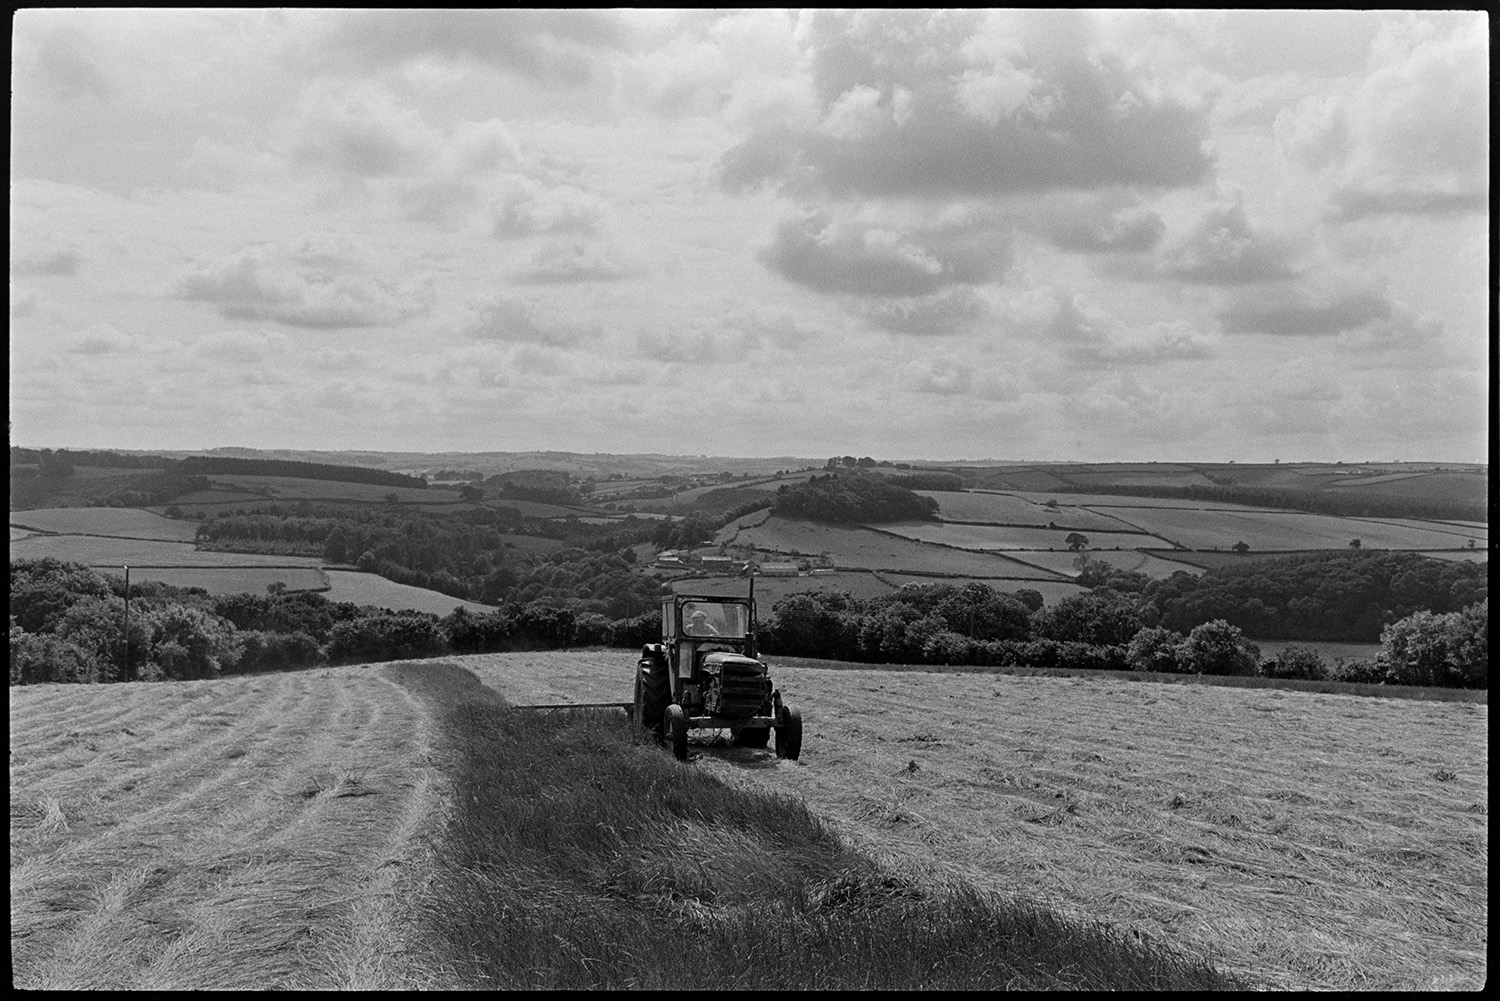 Tractor and grass cutter, mower in sunny landscape. 
[George Ayre using a tractor a mower to cut grass for hay, in a sunny field at Ashwell, Dolton. The tractor is moving towards the camera. Clouds are visible in the sky and a landscape of fields, hedgerows and trees can be seen in the background.]